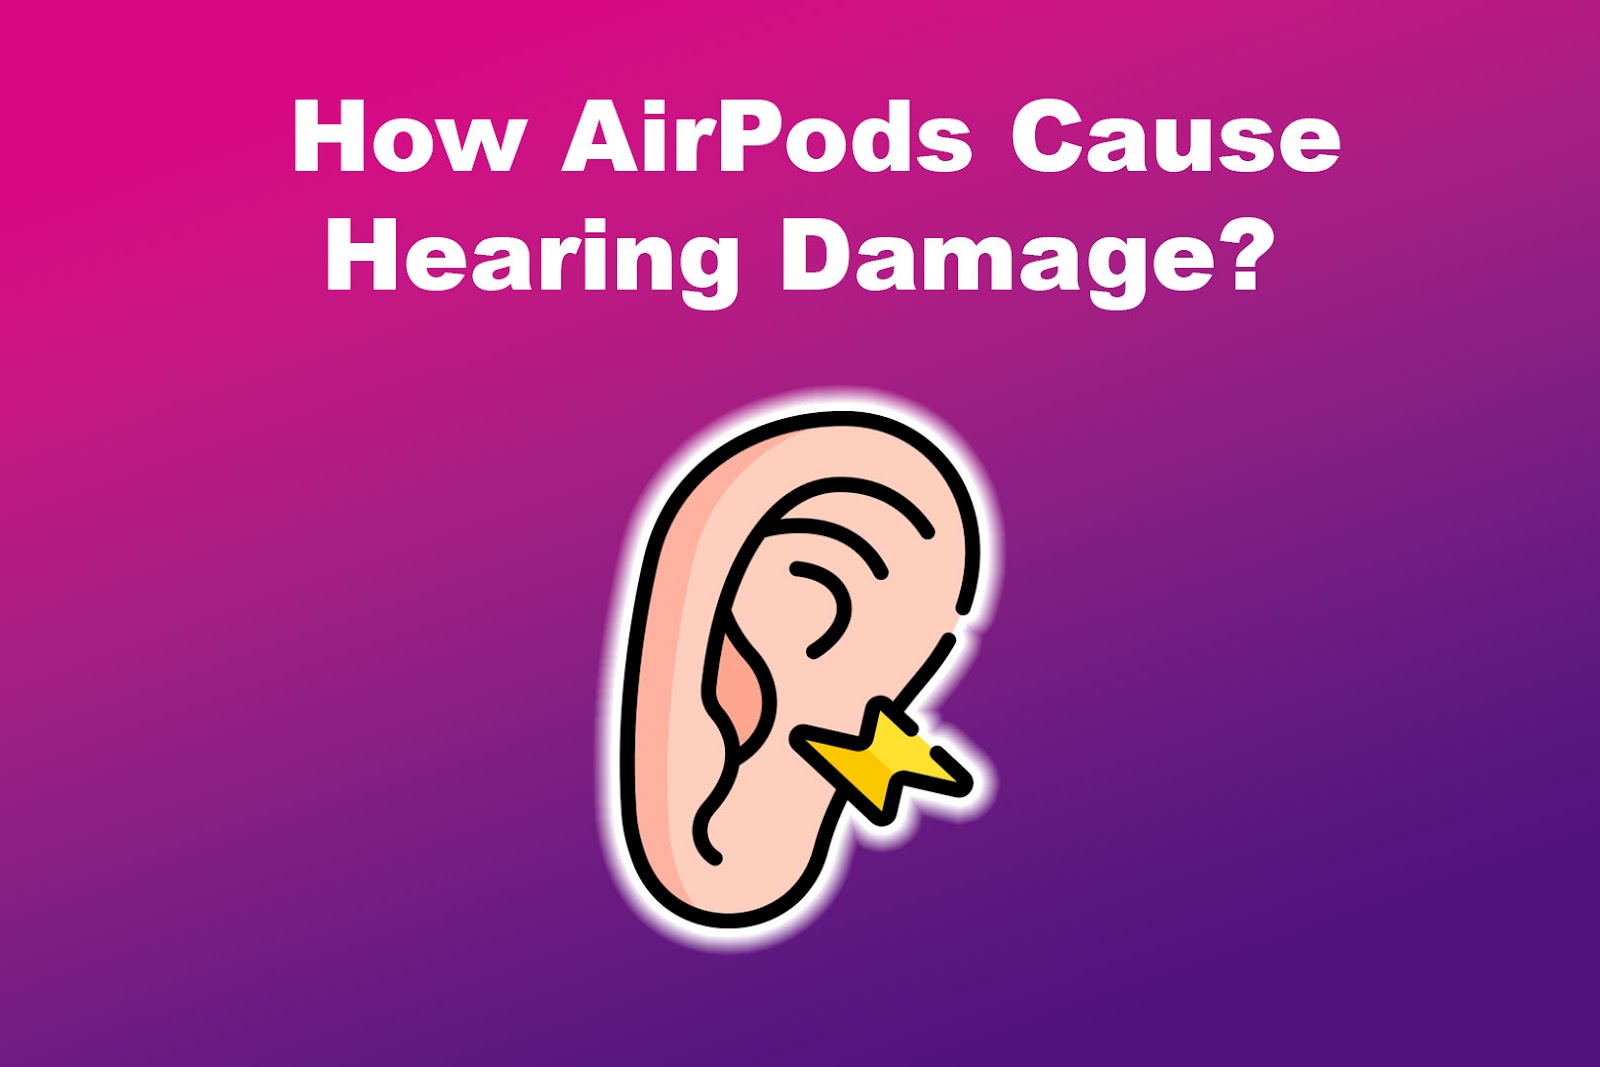 How AirPods Cause Hearing Damage